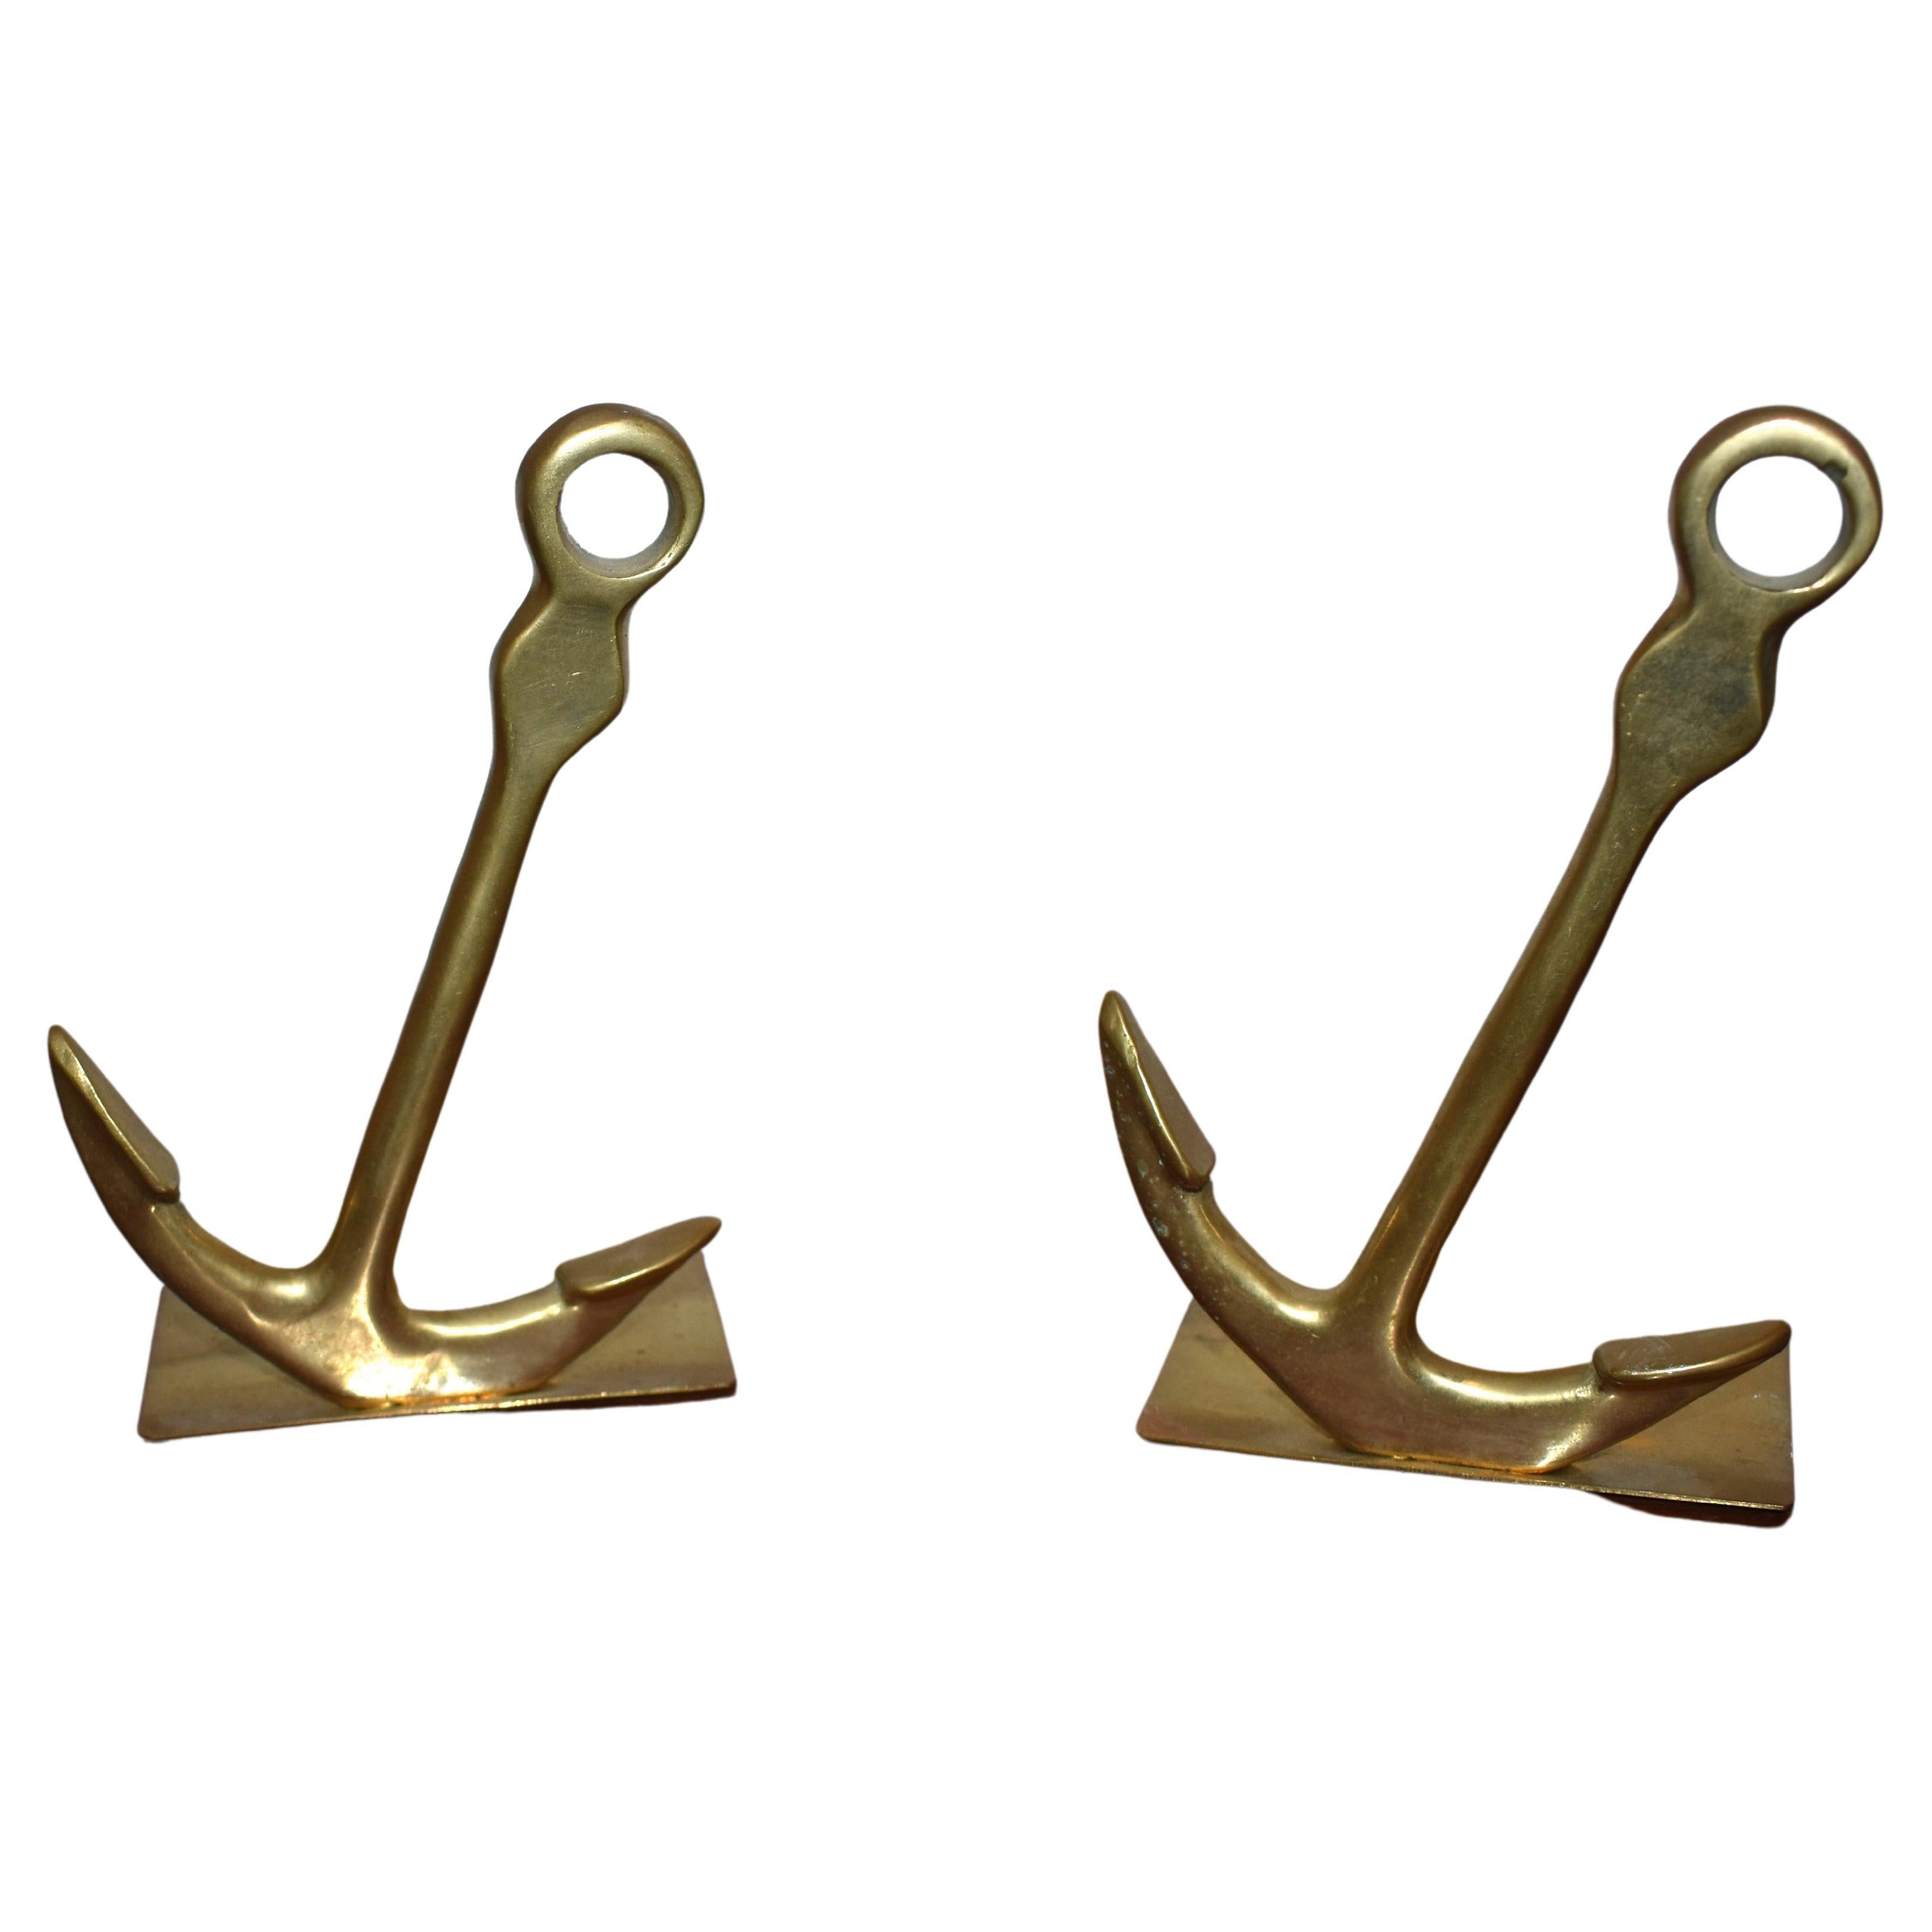 Nautical or Maritime Motif Collapsible Brass Anchor Bookends